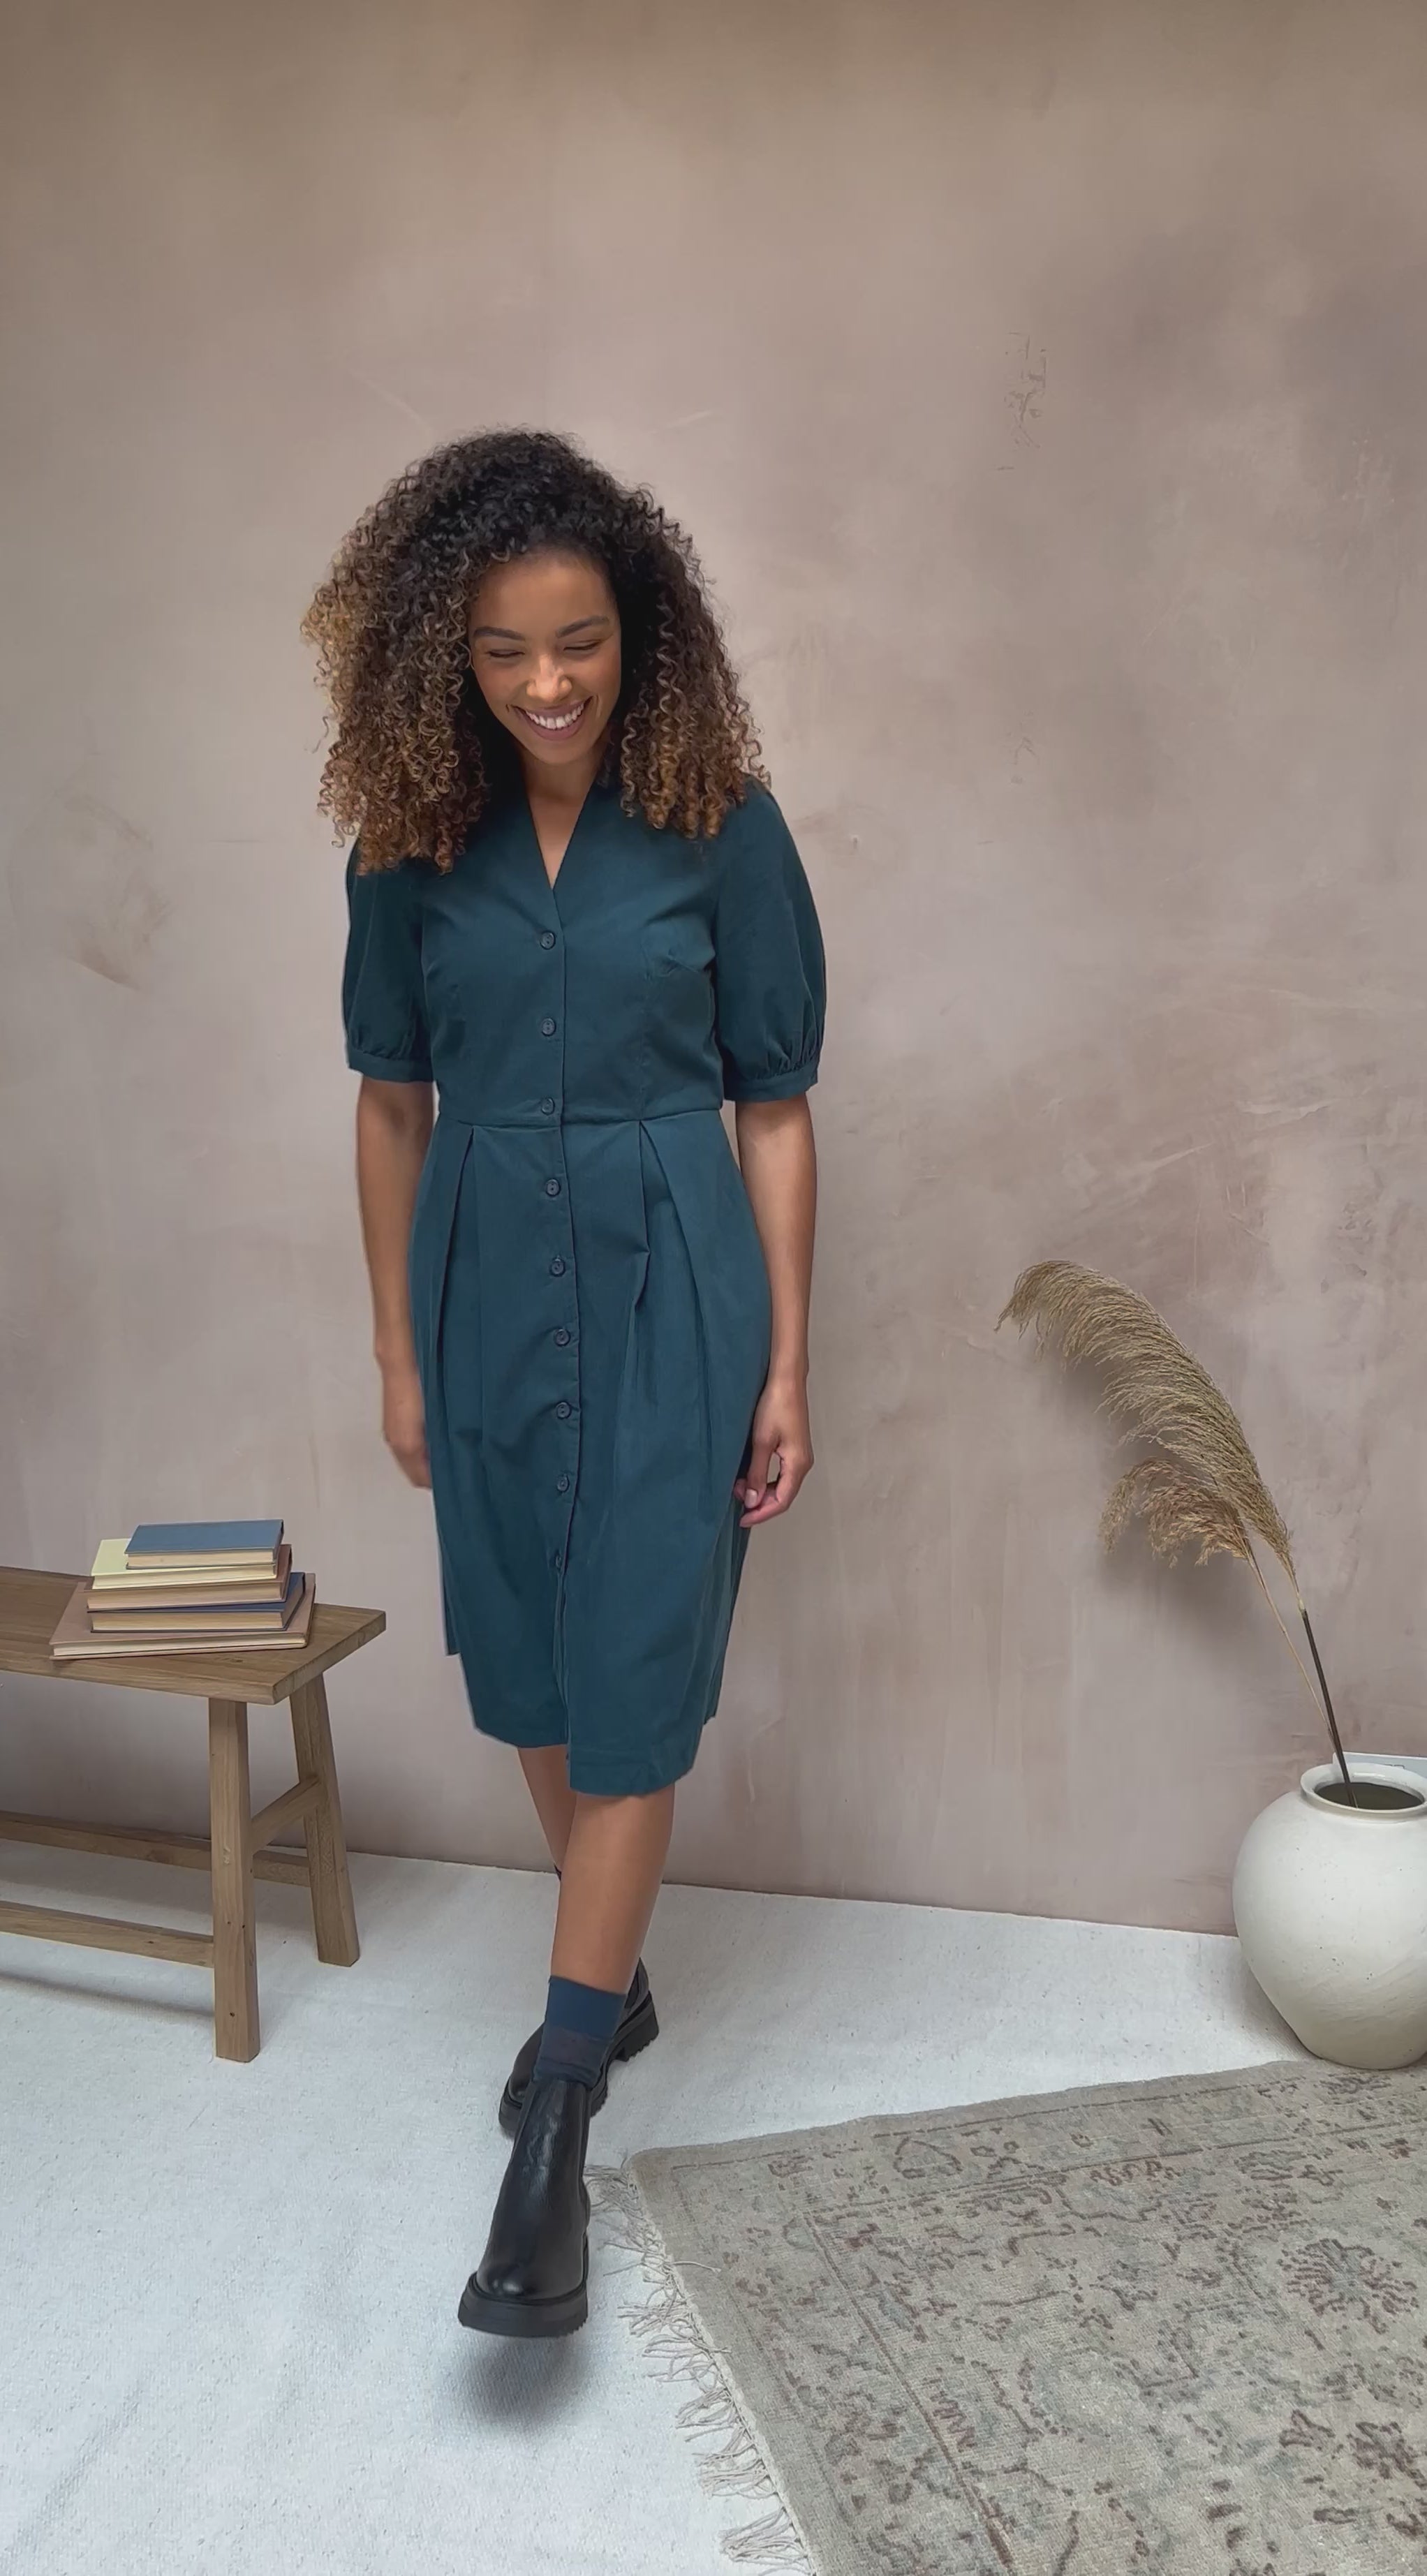 Image of the Stella Shirt Dress in Deep Teal Needlecord by Emily and Fin, featured in a video.